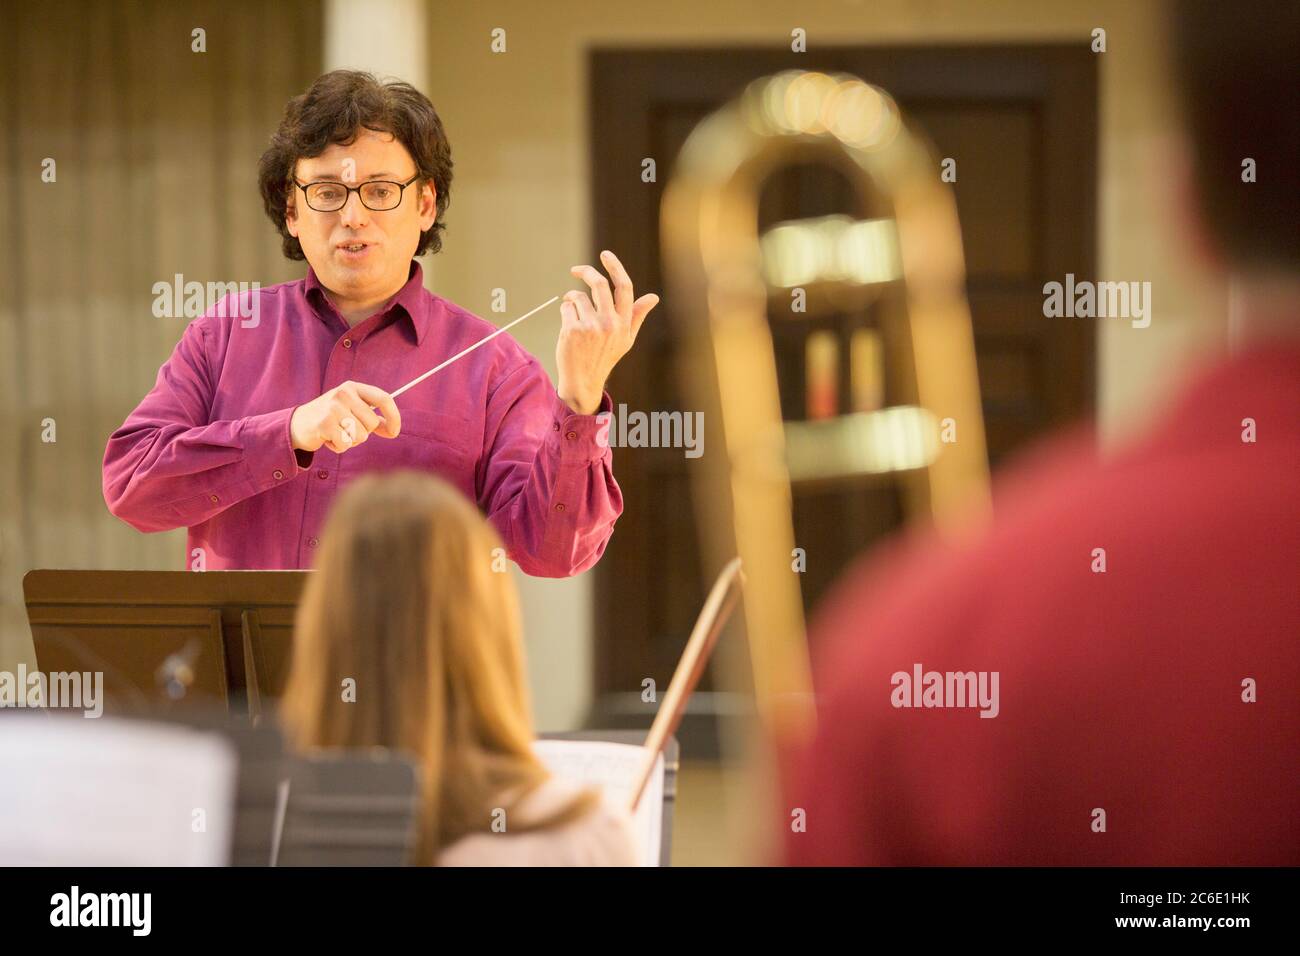 Conductor leading orchestra in practice Stock Photo